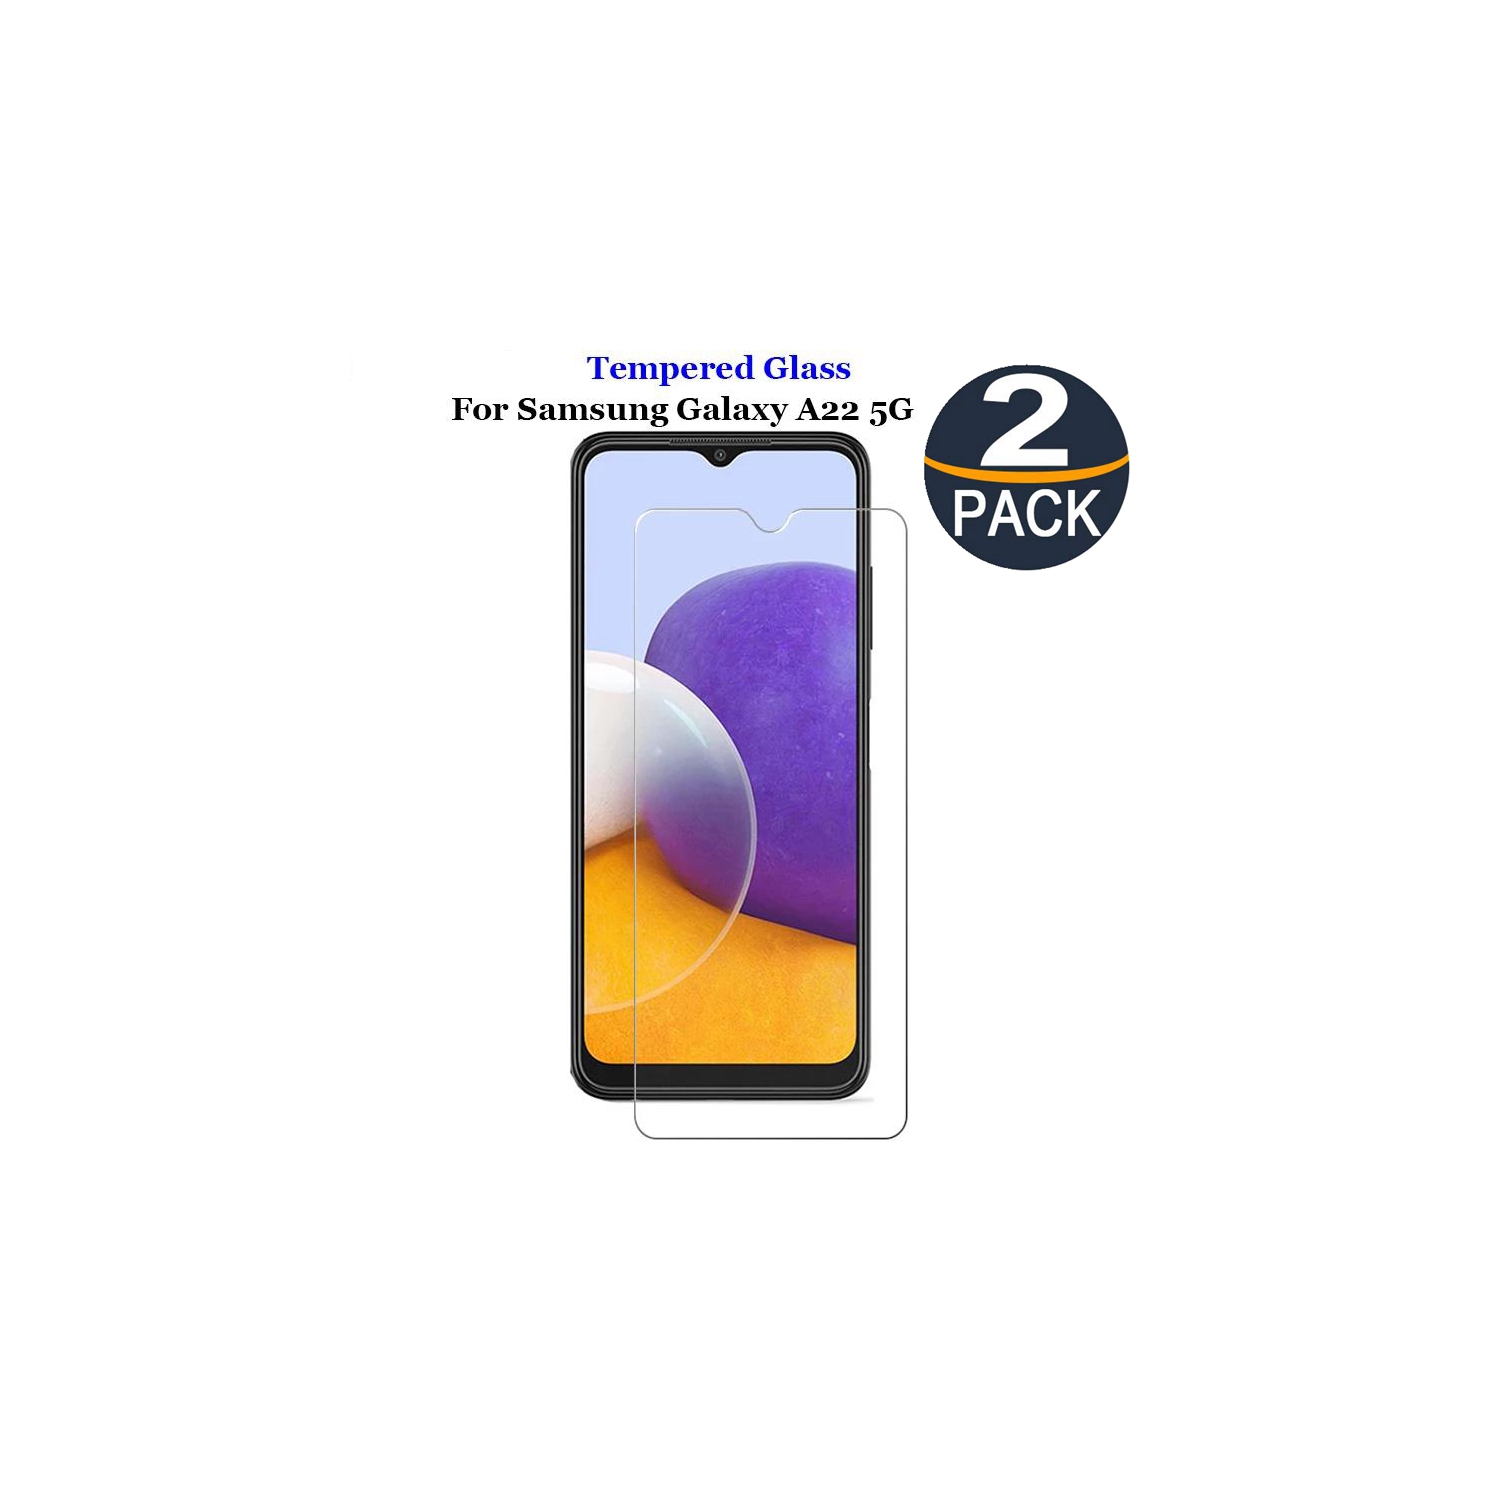 【2 Packs】 CSmart Premium Tempered Glass Screen Protector for Samsung Galaxy A22 5G (6.6"), Case Friendly & Bubble Free